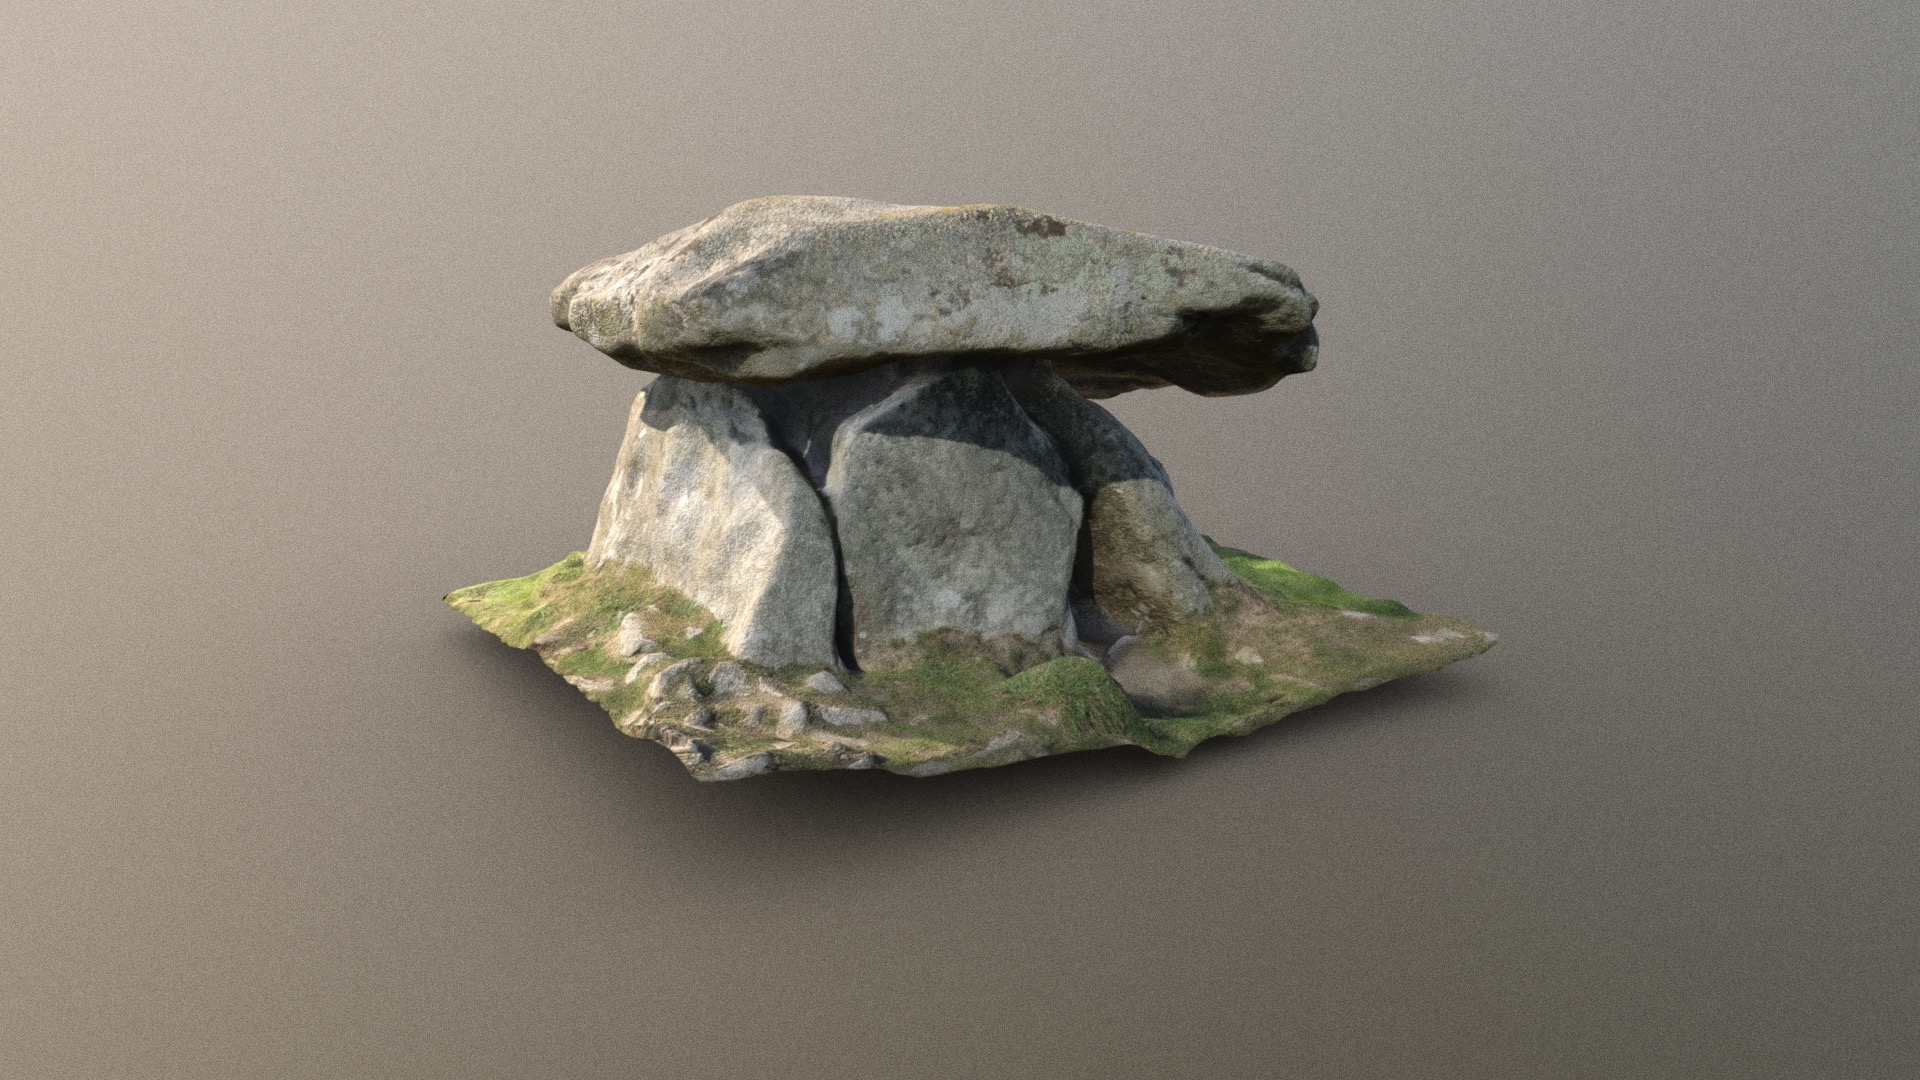 3D model Chûn Quoit, Cornwall - This is a 3D model of the Chûn Quoit, Cornwall. The 3D model is about a rock with a green substance on it.